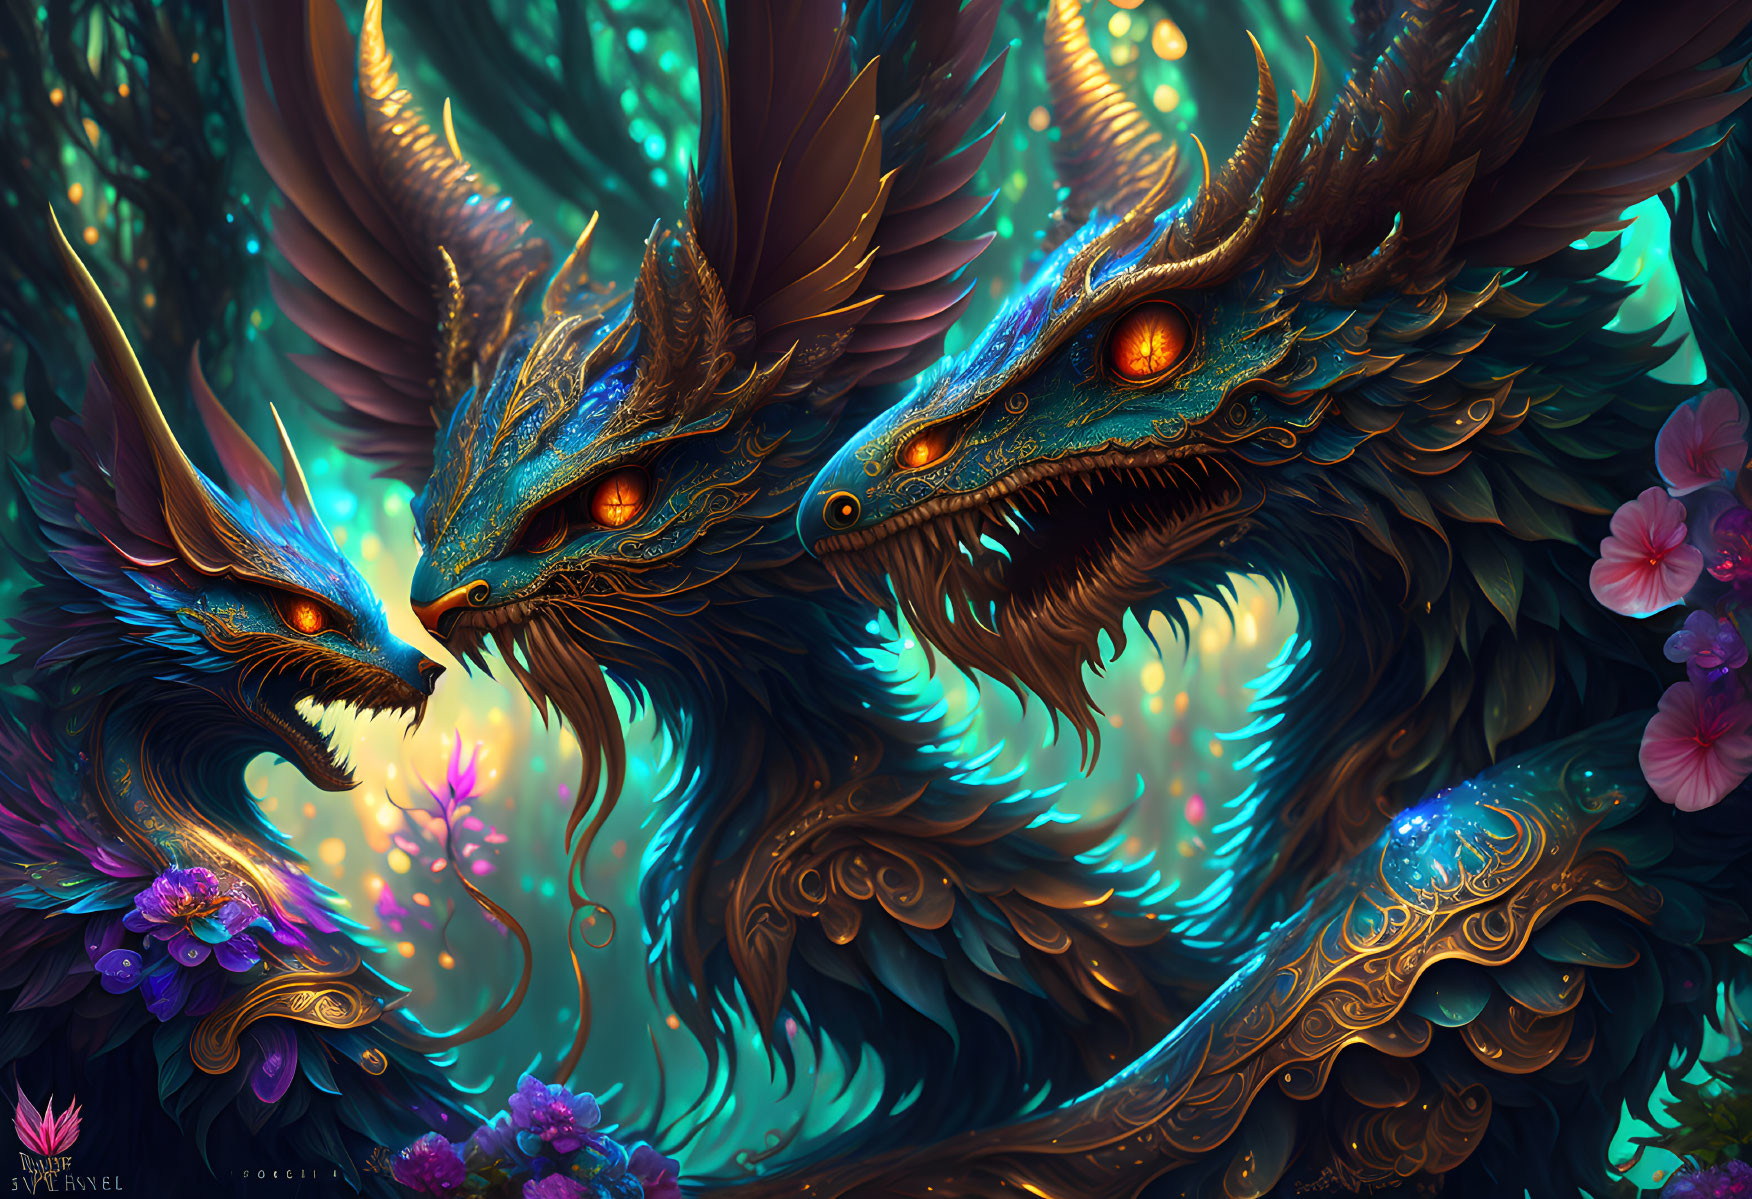 Intricately detailed dragon art with glowing eyes and ornate scales